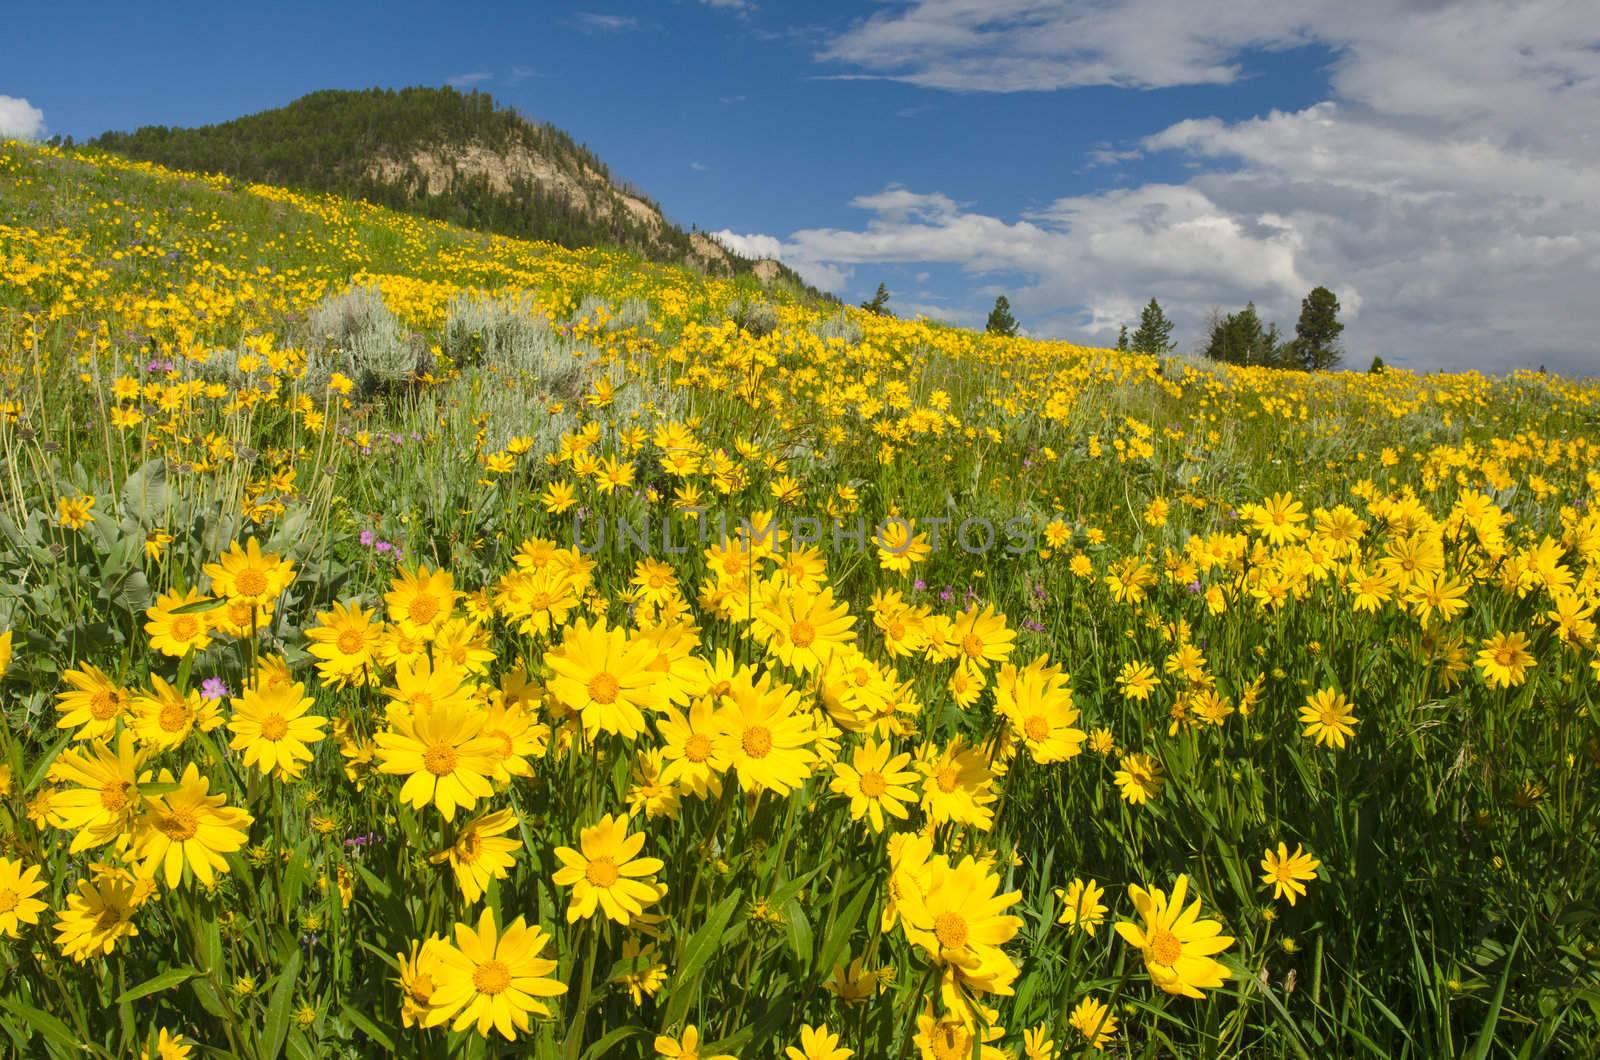 A meadow full of blooming Arnica flowers, Yellowstone National Park, Park County, Wyoming, USA